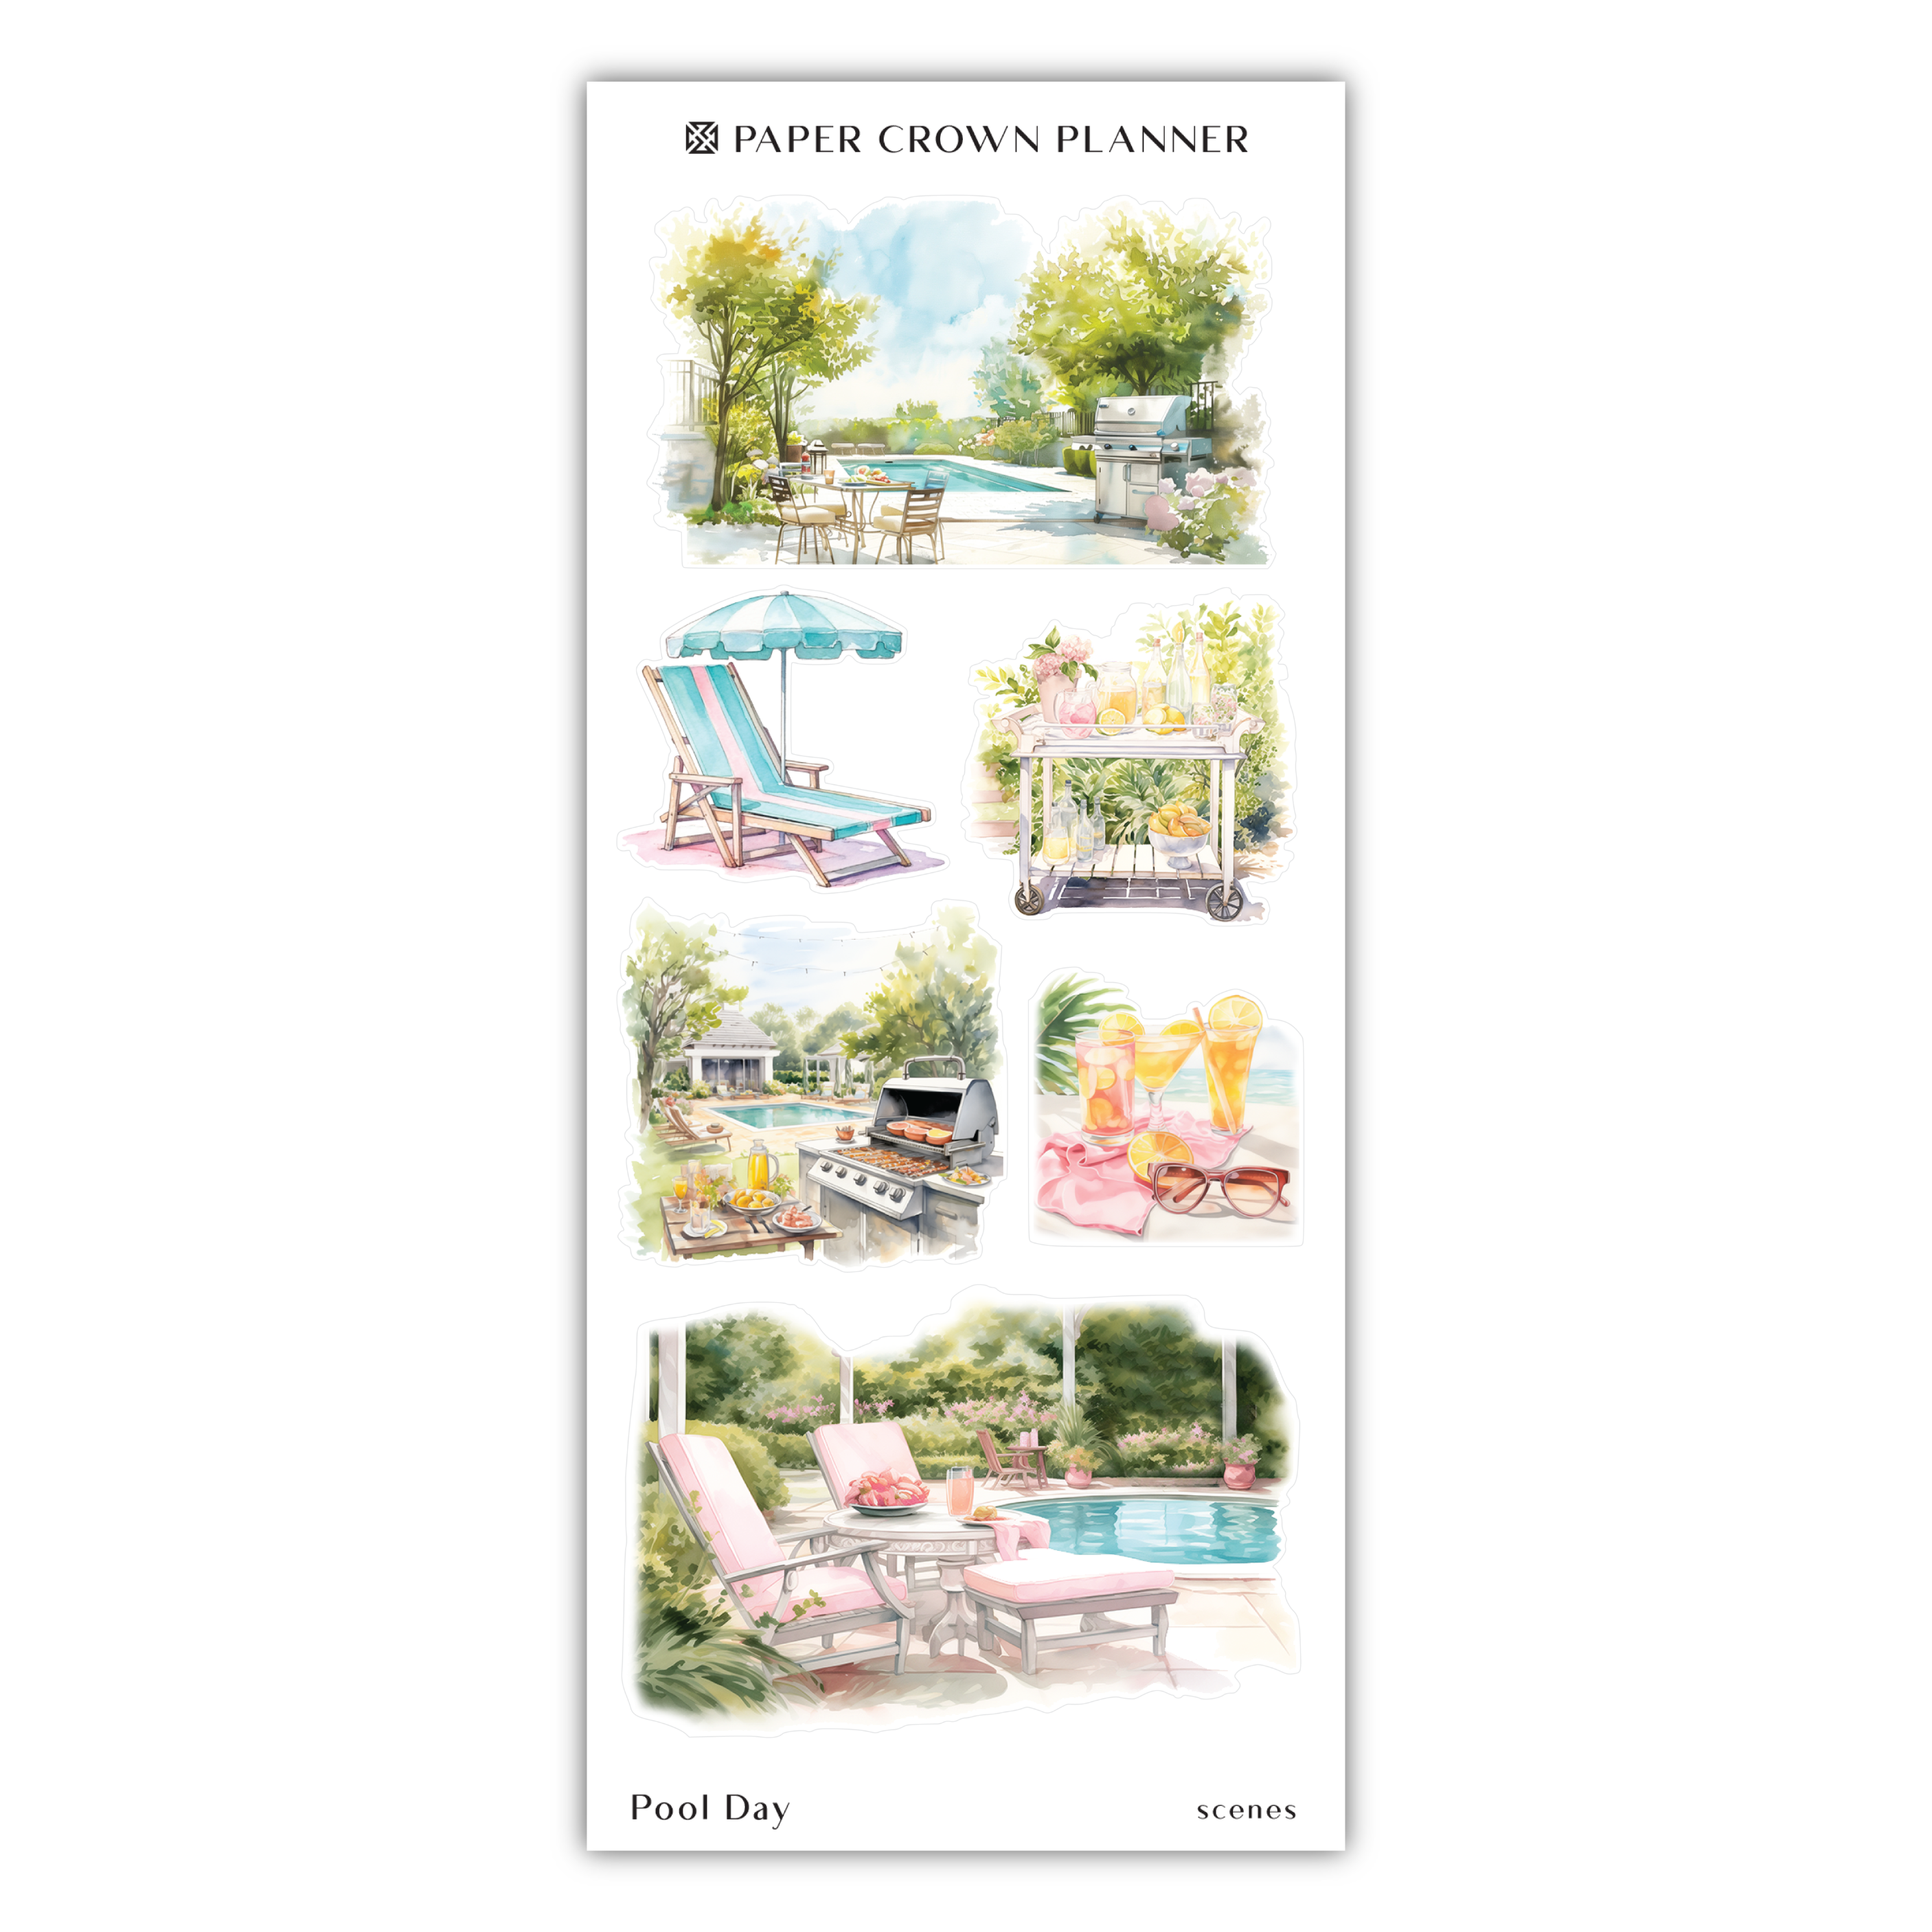 a watercolor painting of lawn chairs and a pool